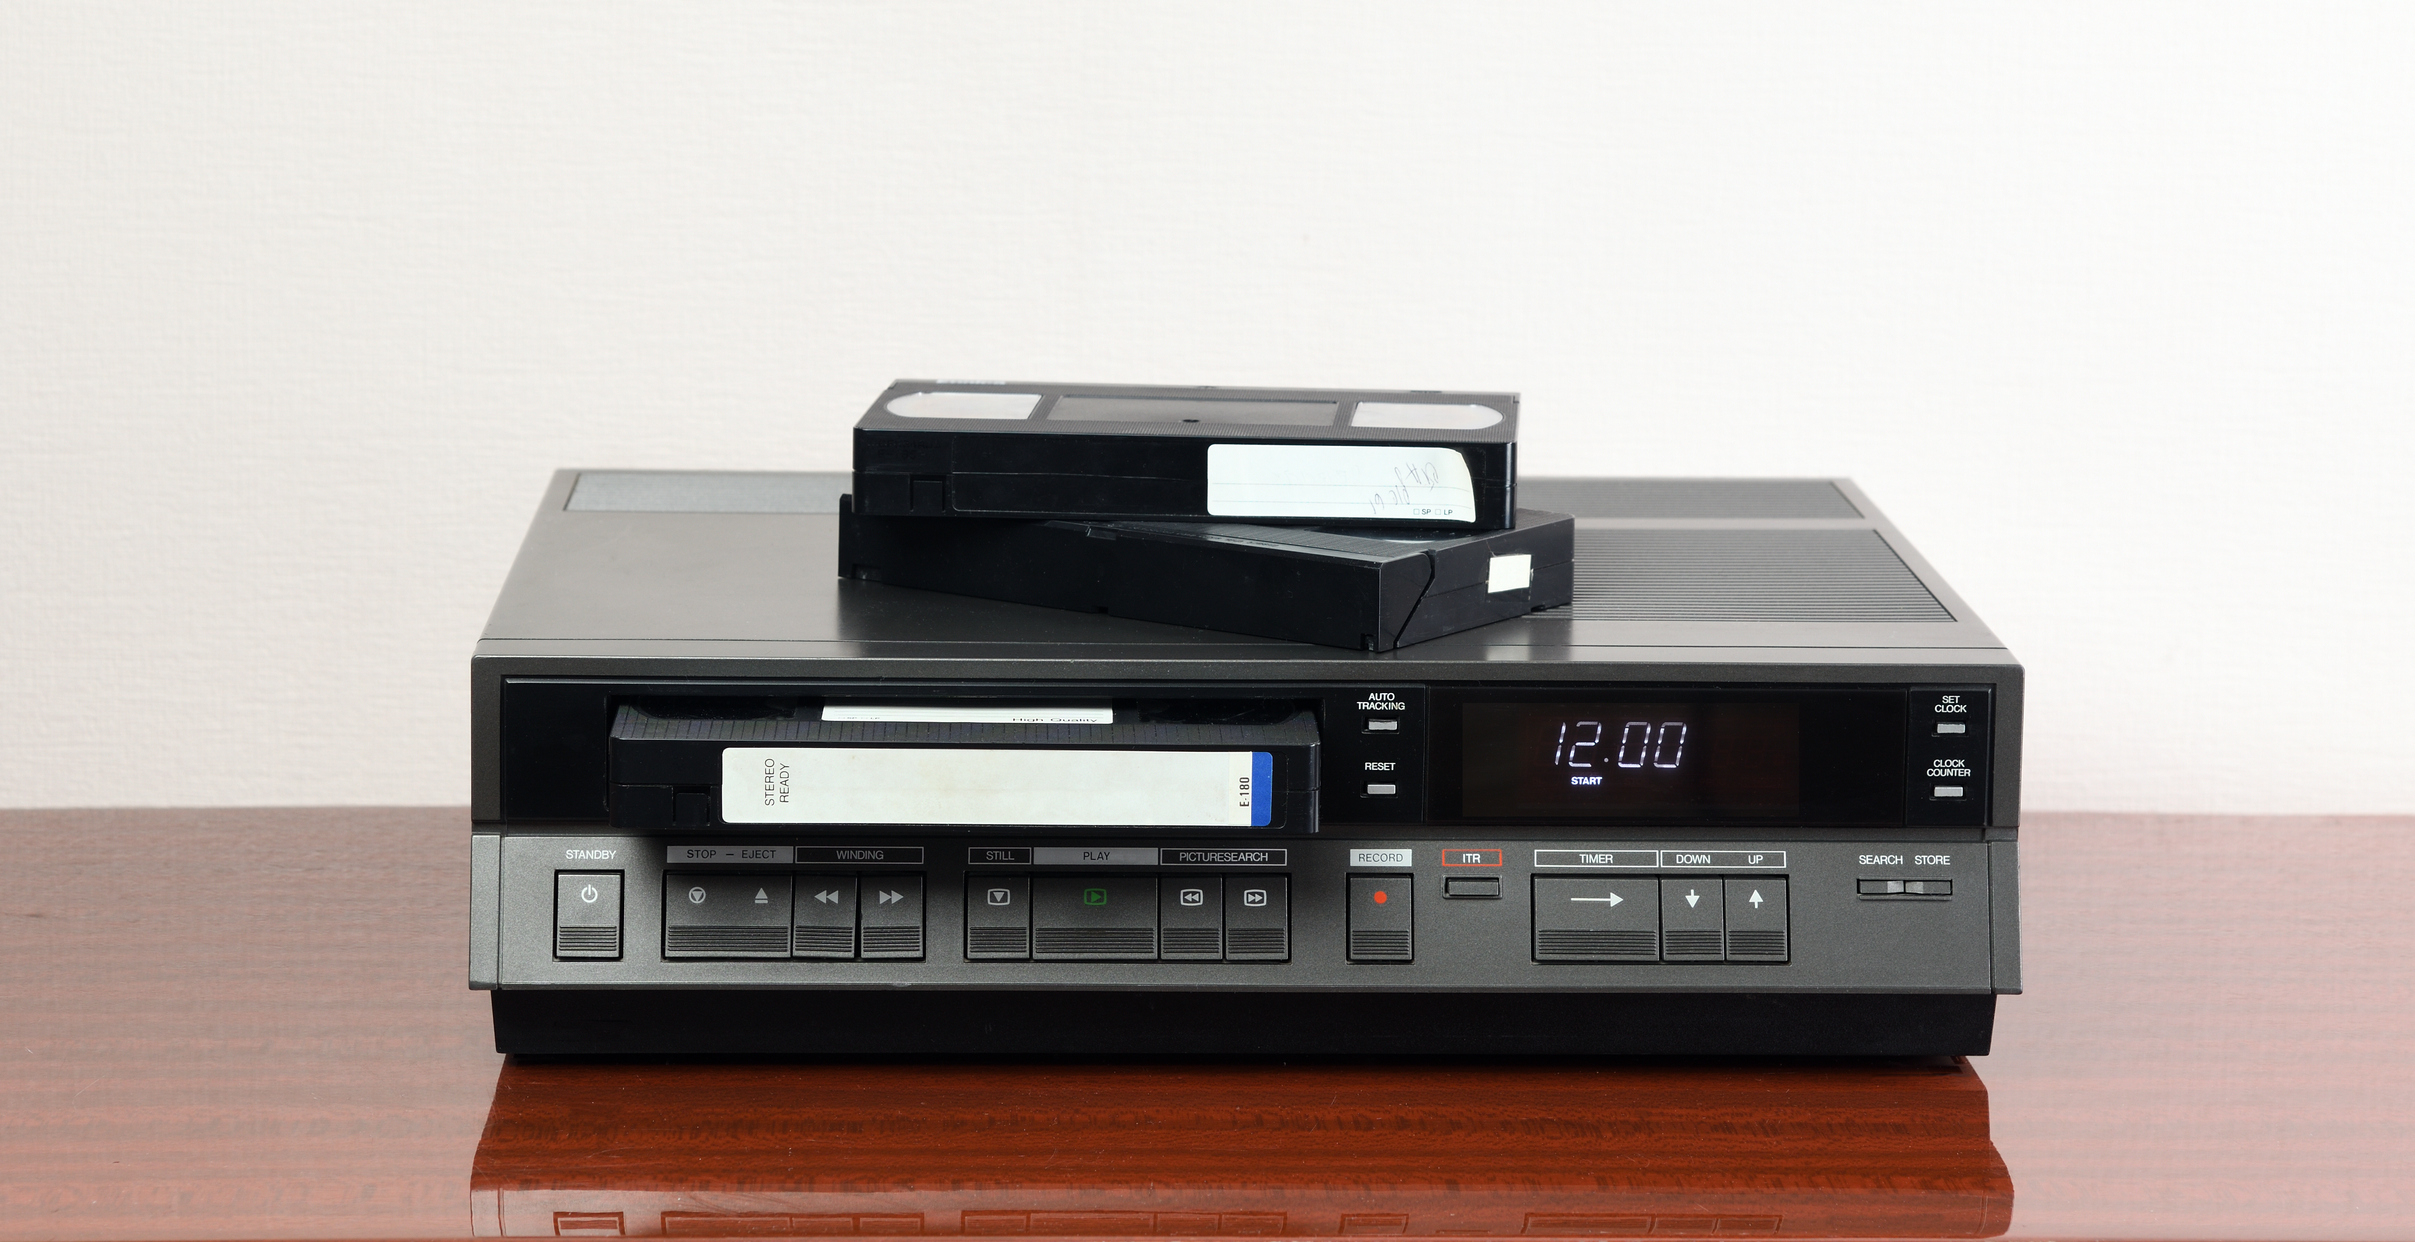 A VCR with VHS tapes on top